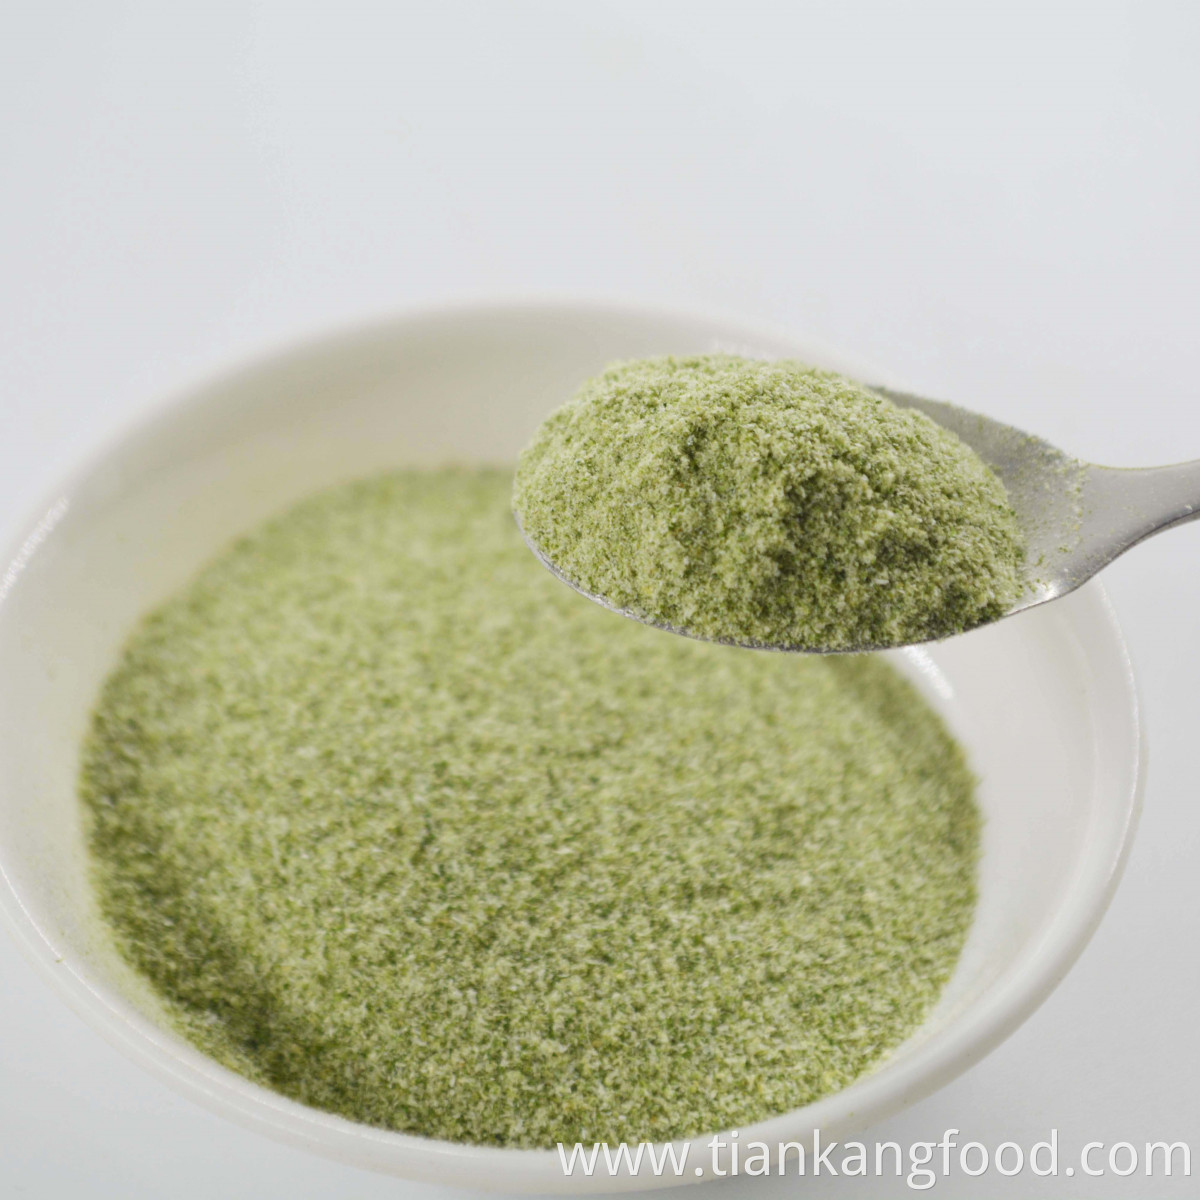 Dehydrated chive powder